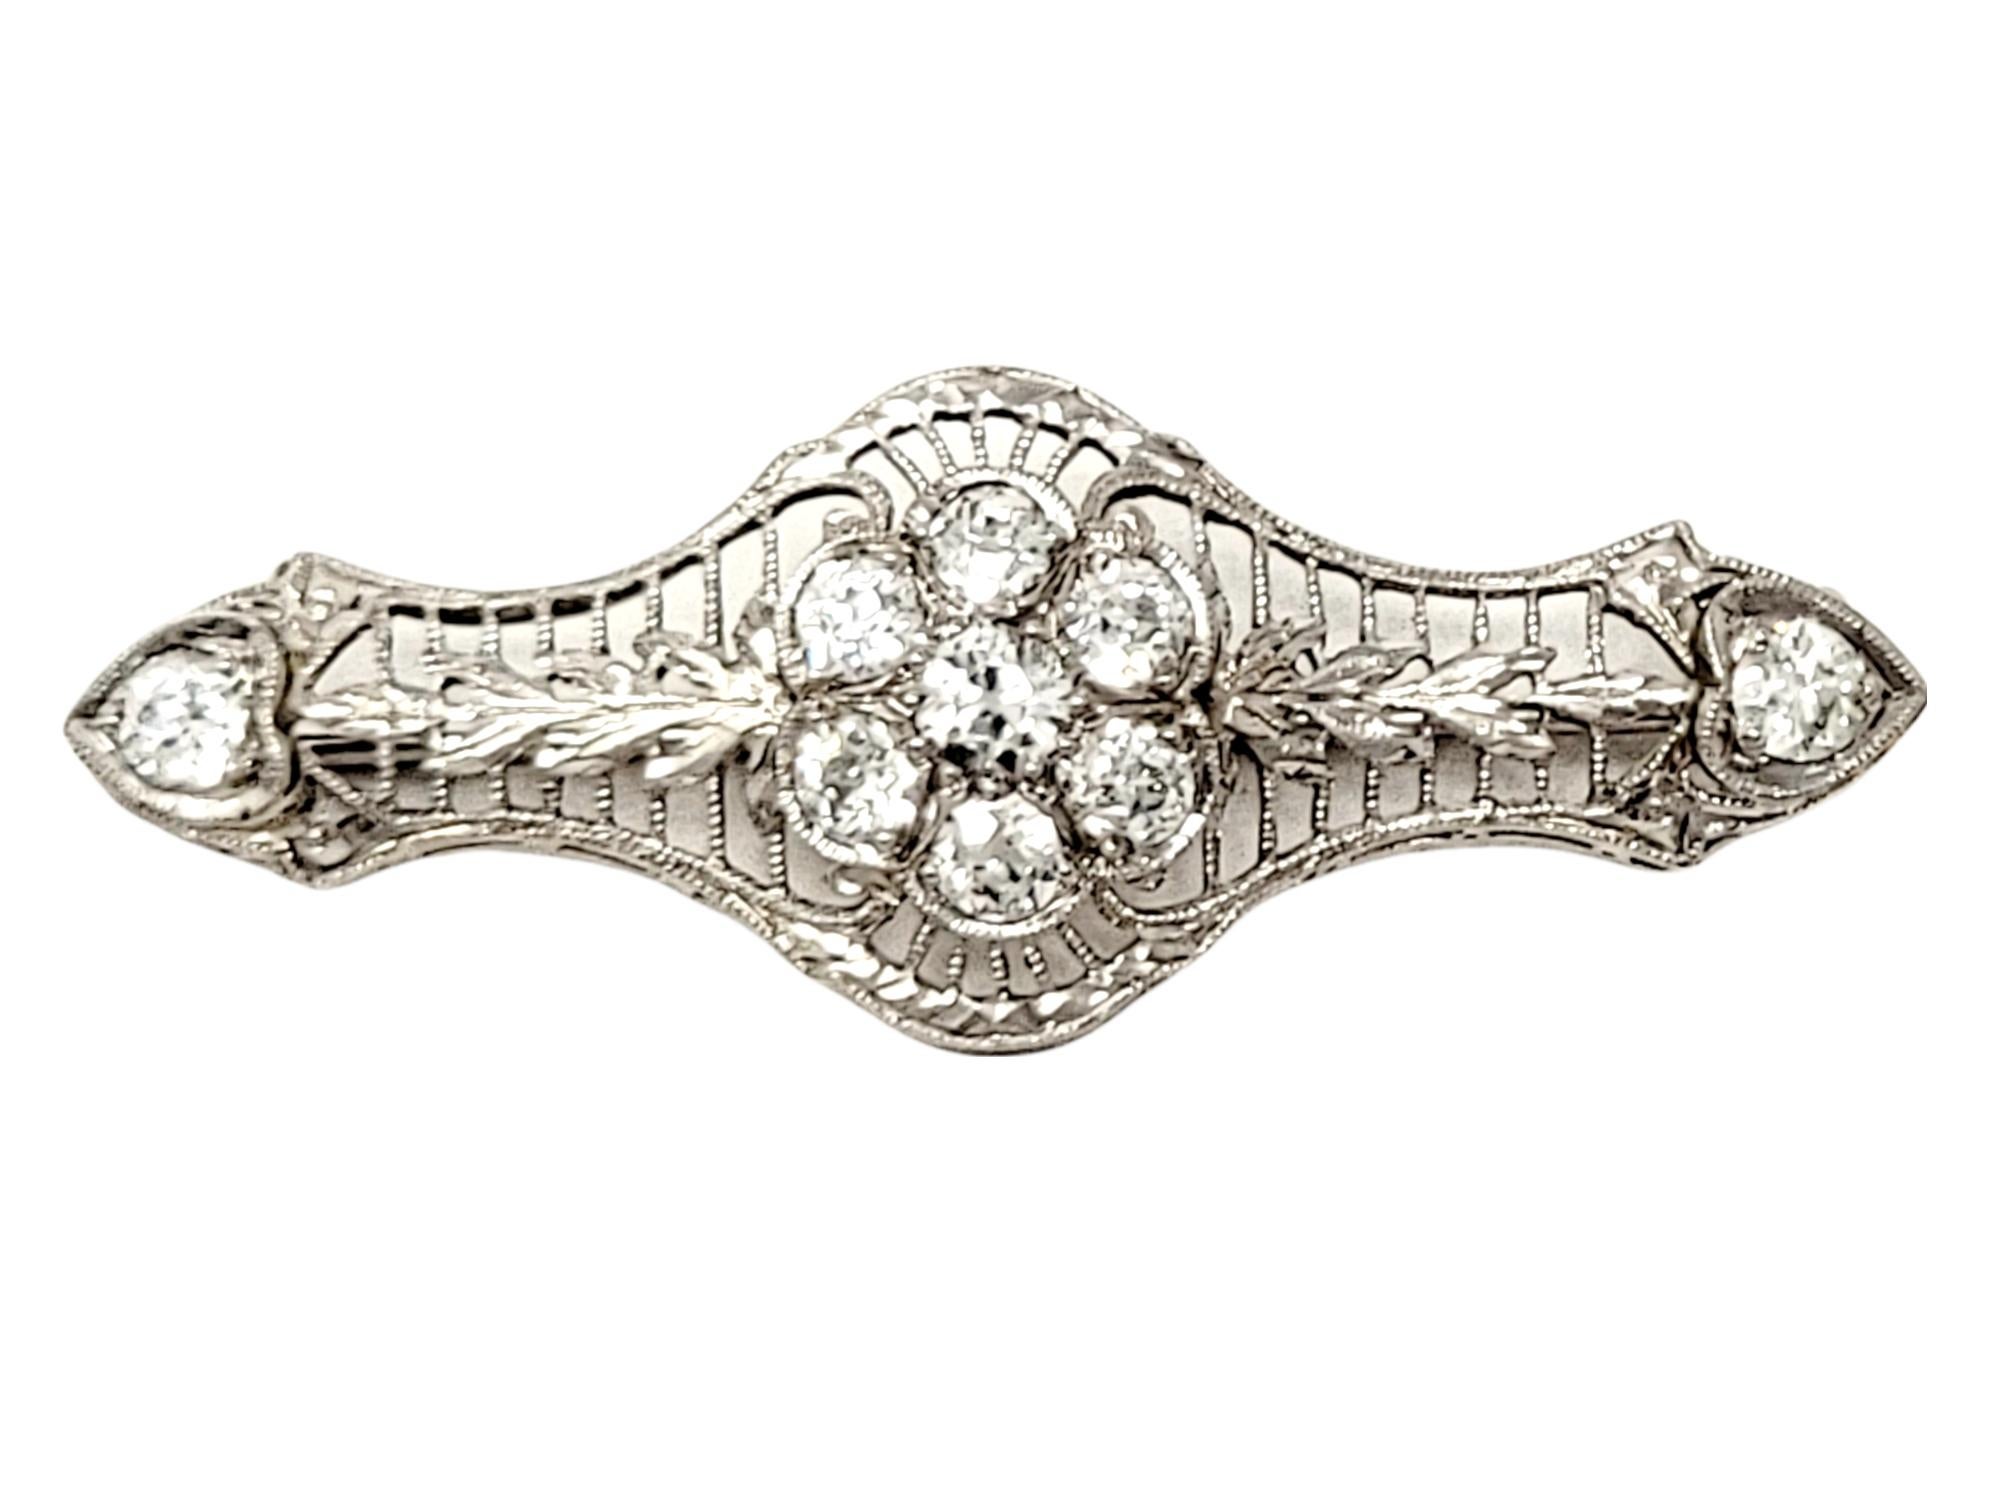 Gorgeous sparkling vintage diamond brooch with an intricate open filigree design throughout. 

Metal: 18K White Gold
Closure: Hinged stick pin
Natural Diamonds: 1.26 ctw 
Diamond Cut: Old European
Diamond Color: G-H
Diamond Clarity: VS-SI
Length: